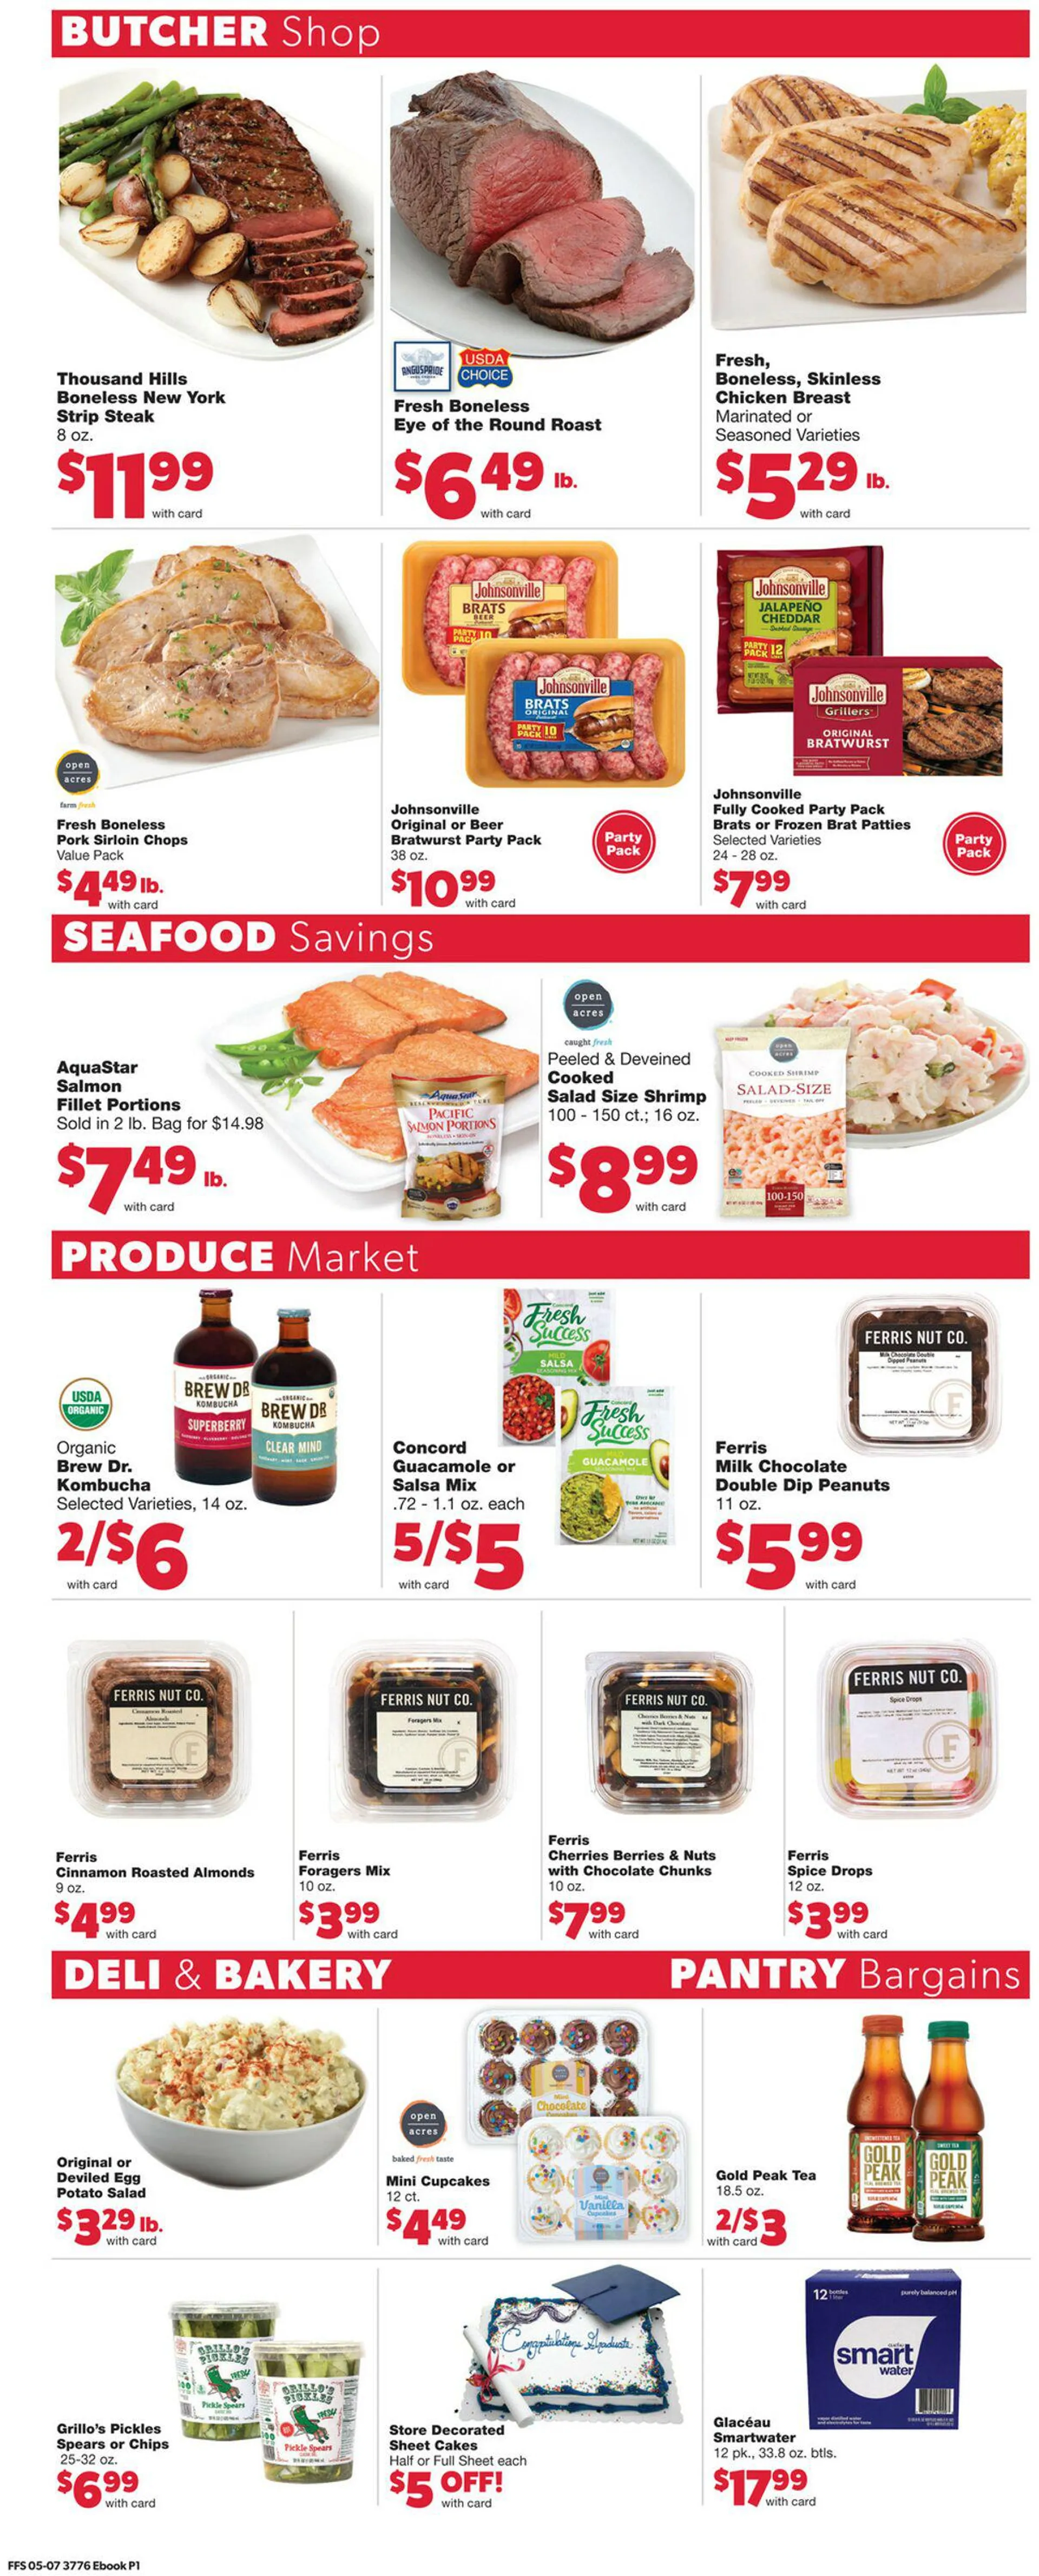 Family Fare Current weekly ad - 6